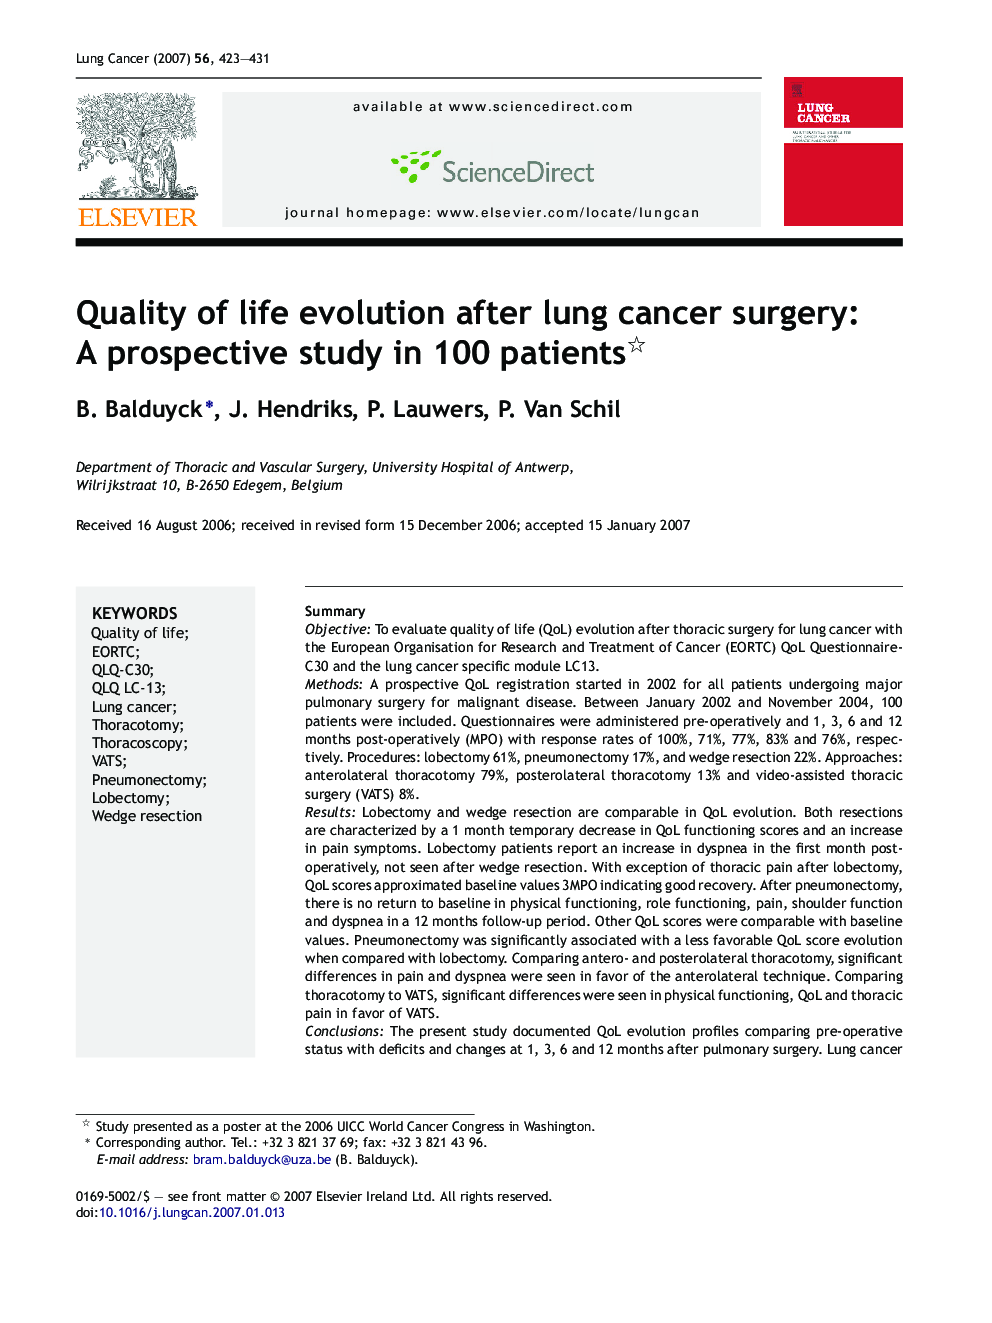 Quality of life evolution after lung cancer surgery: A prospective study in 100 patients 